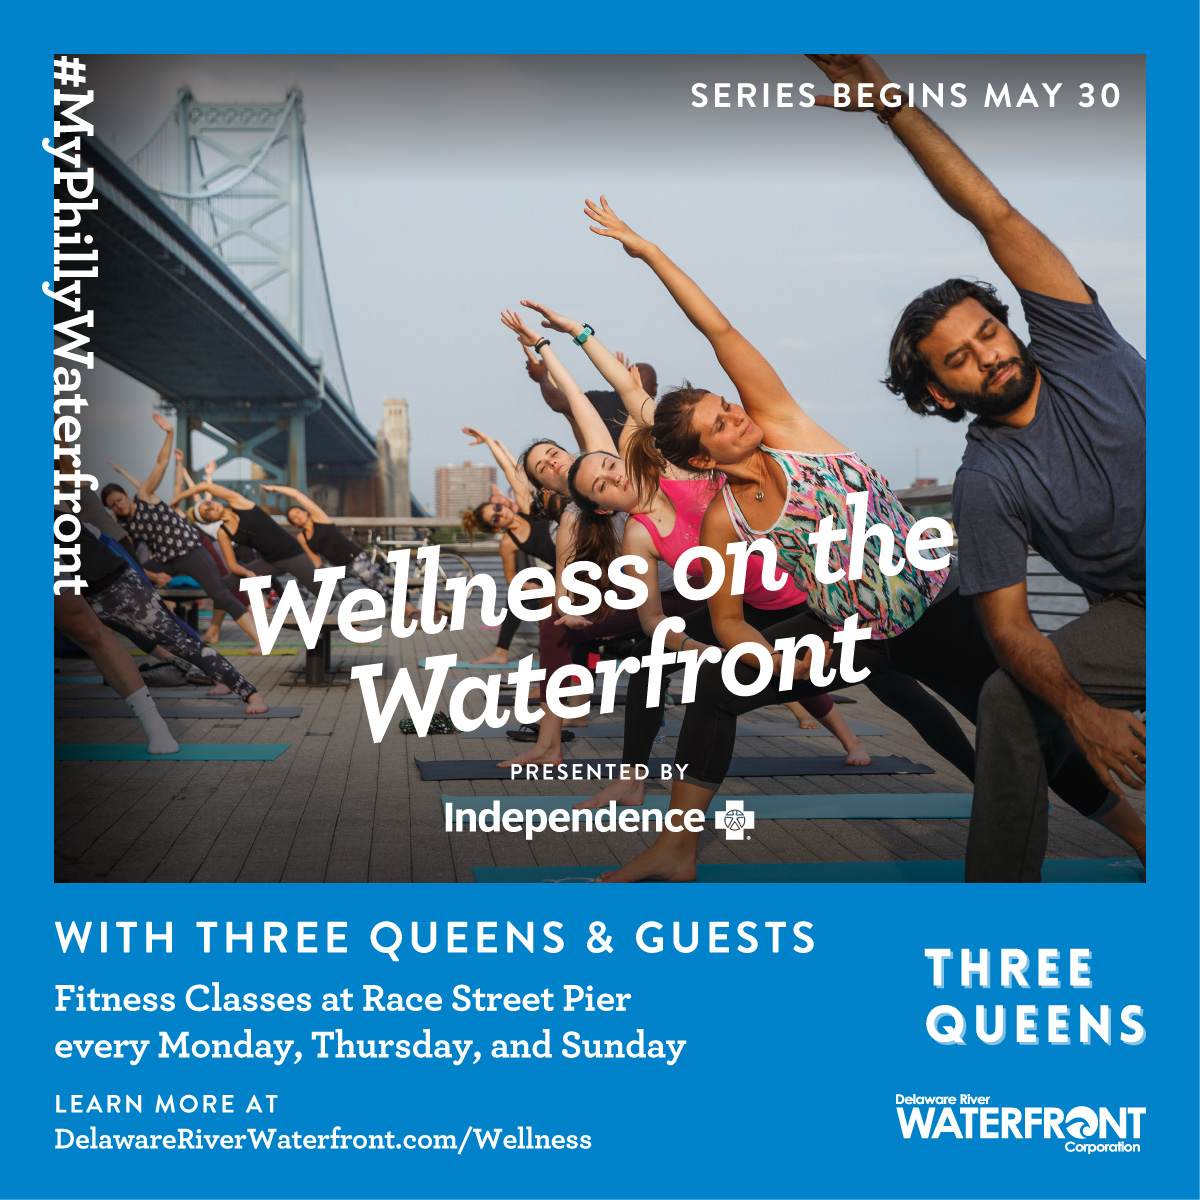 Wellness on the Waterfront presented by Independence Blue Cross